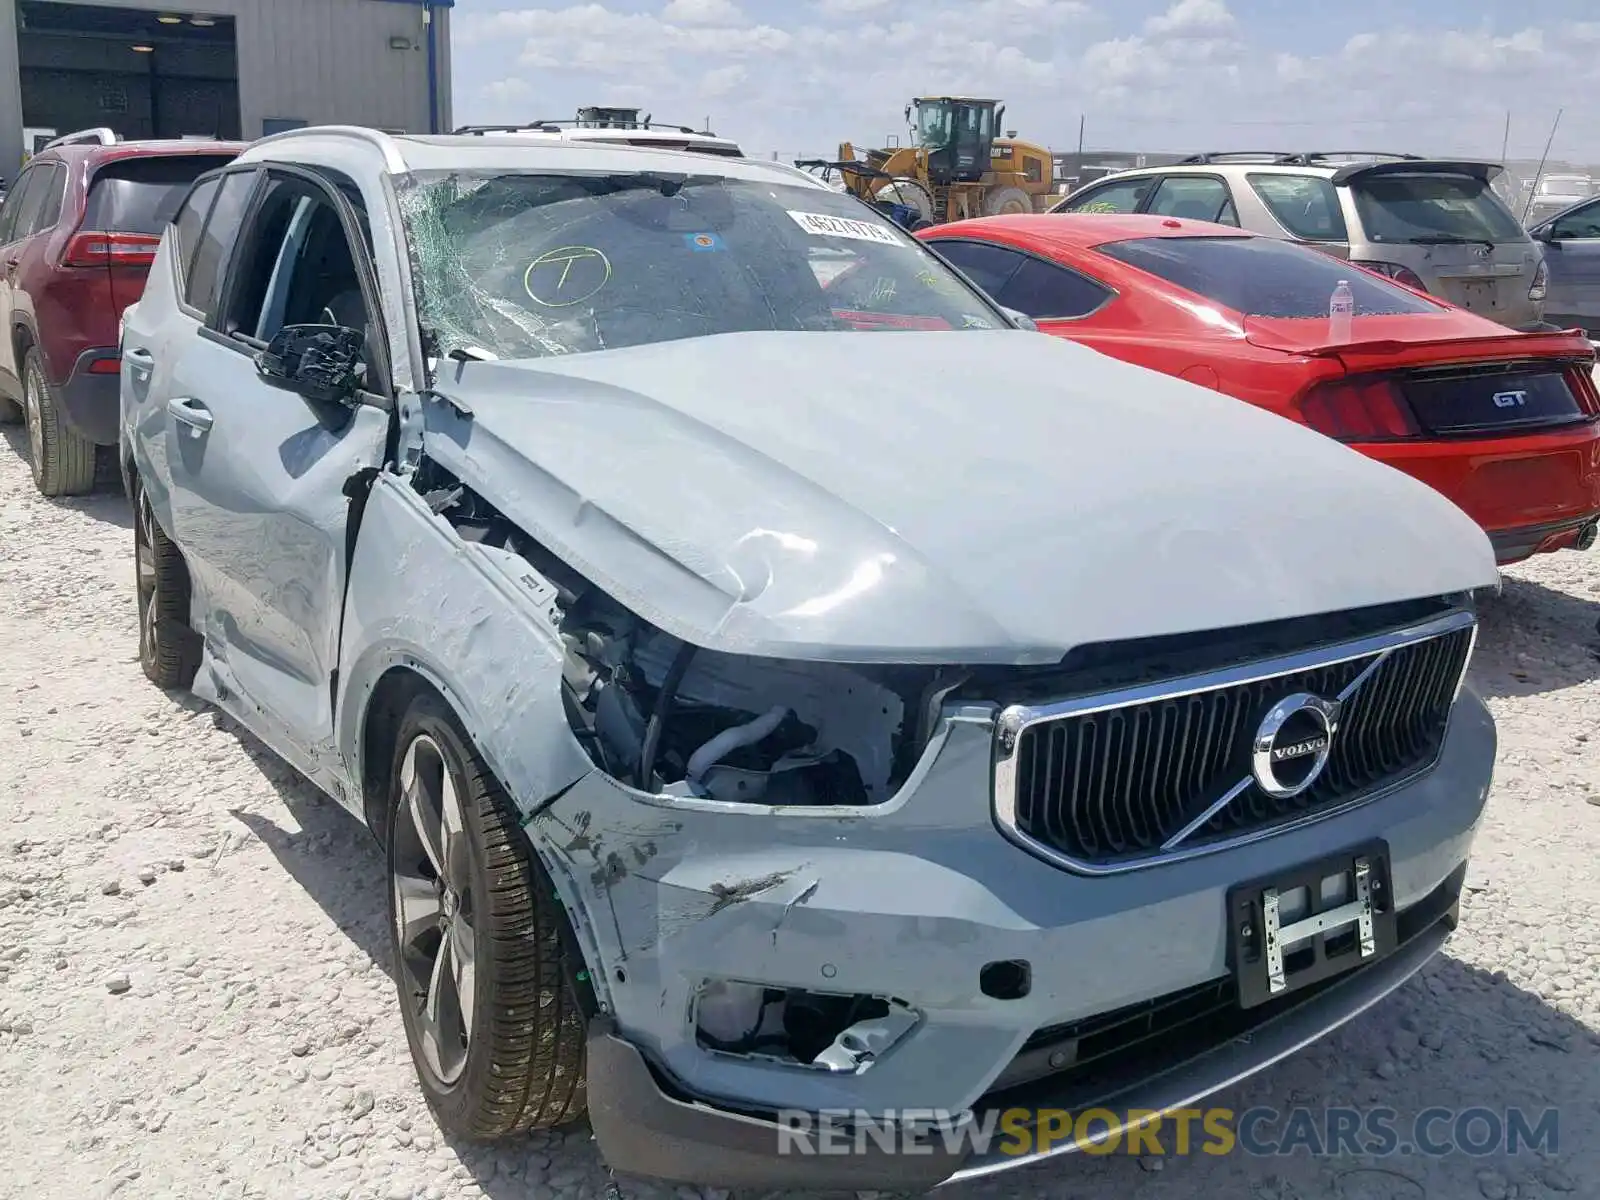 1 Photograph of a damaged car YV4162UK8K2090156 VOLVO XC40 T5 2019